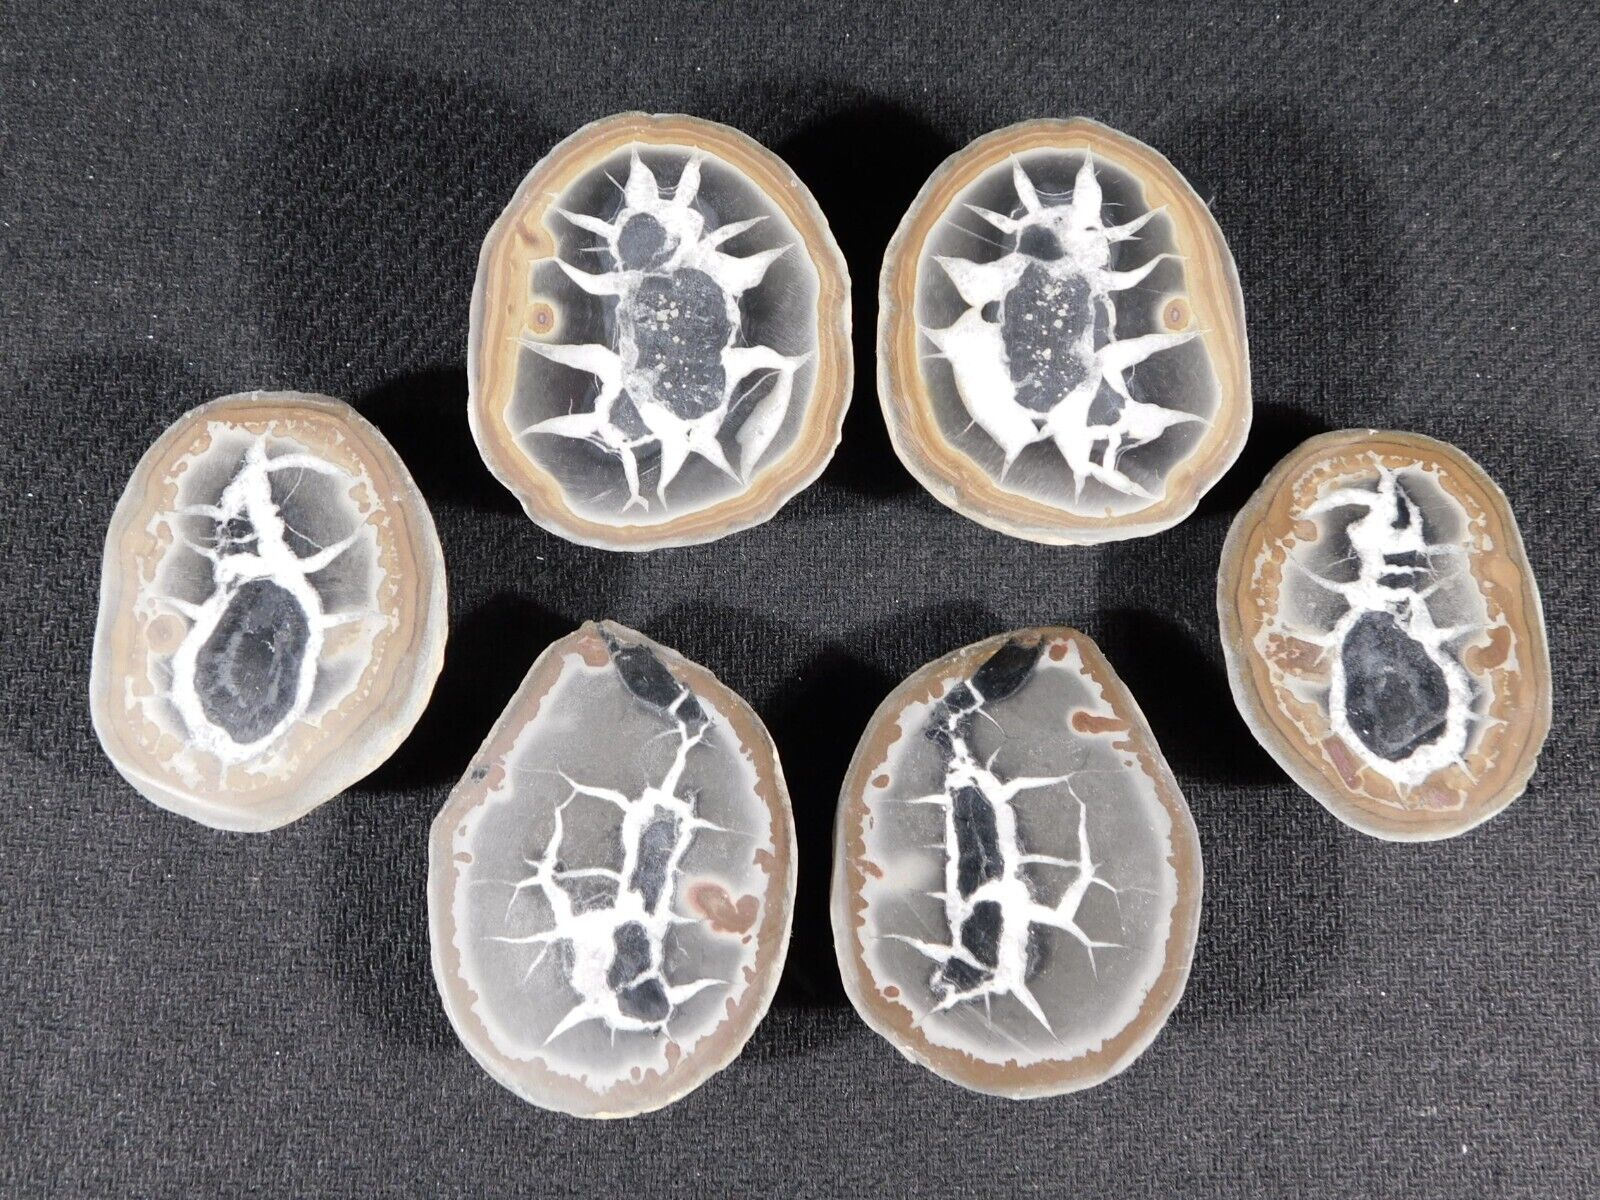 Lot of THREE Split Cut and Polished SEPTARIAN Nodules Morocco 250gr